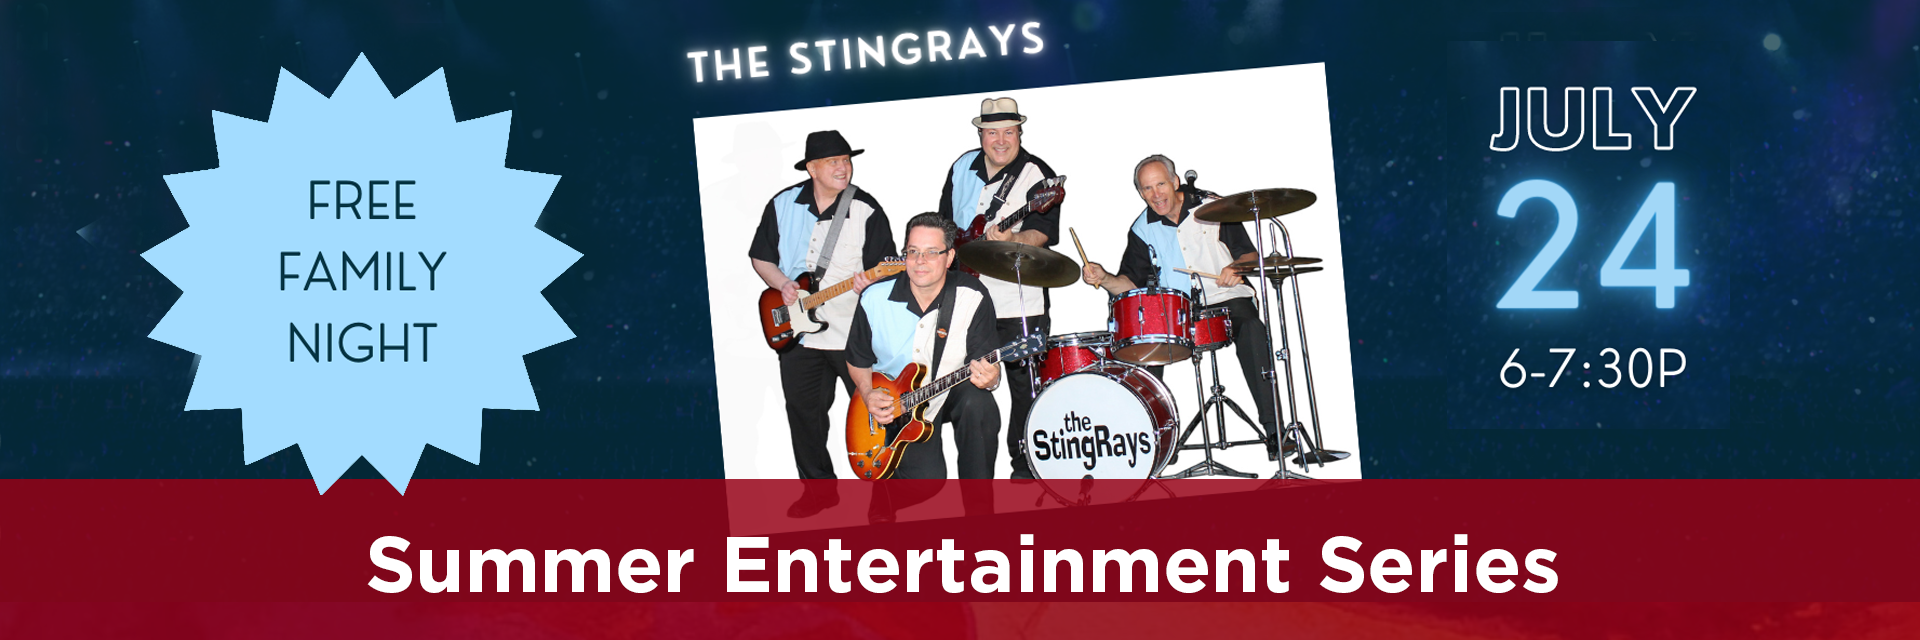 The StingRays: Outdoor Music Concert